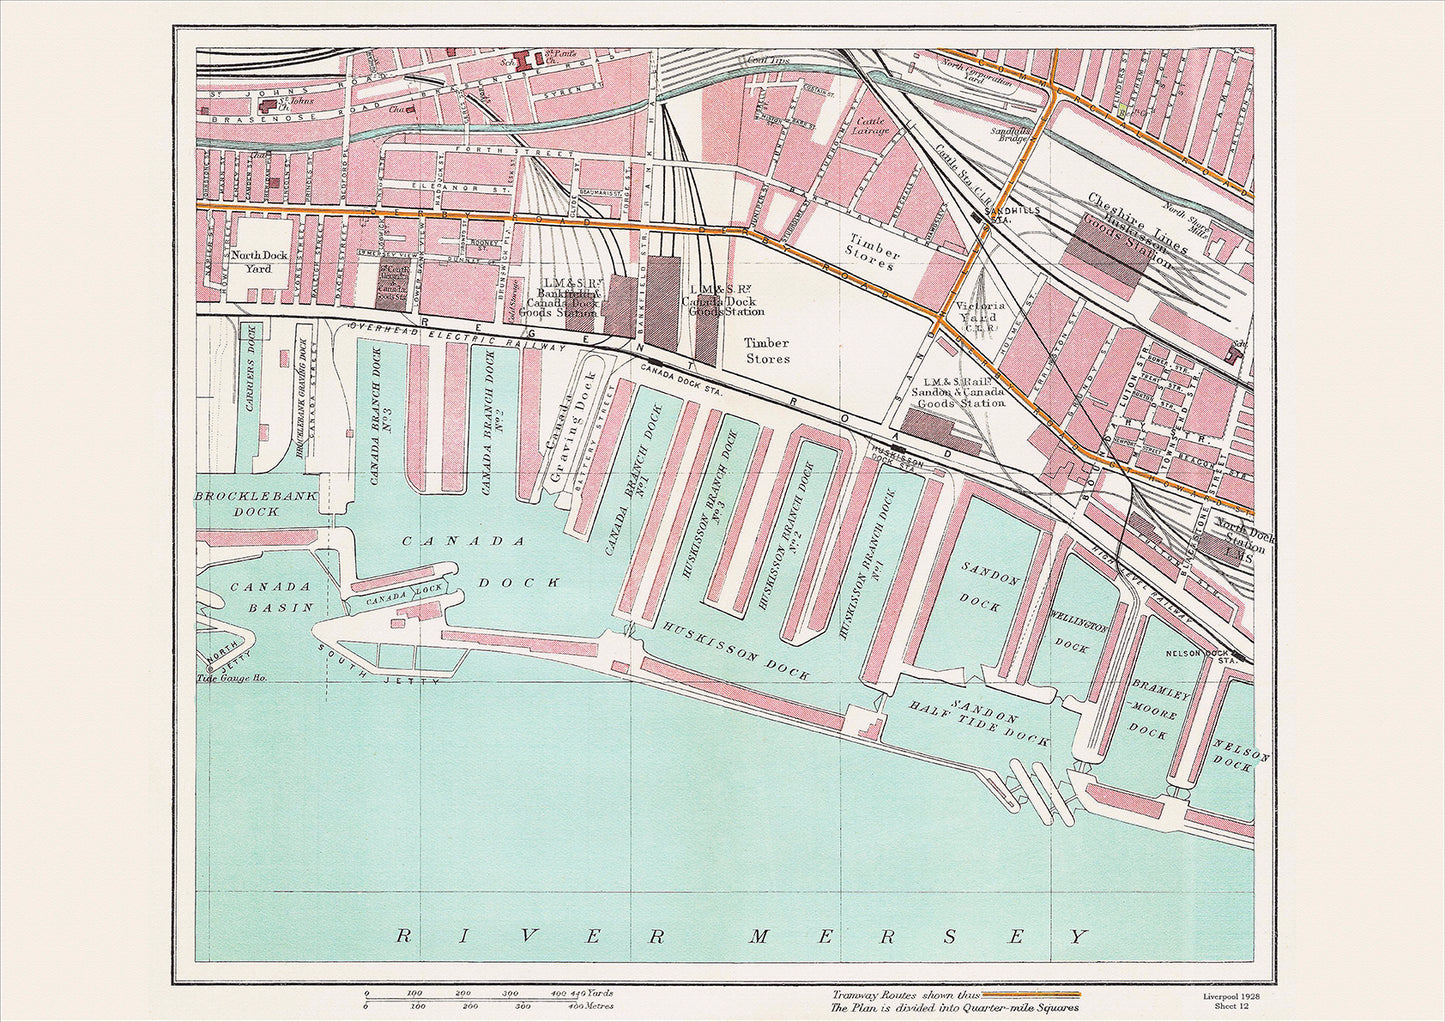 Liverpool in 1928 Series - showing Canada Dock area (Liv1928-12)